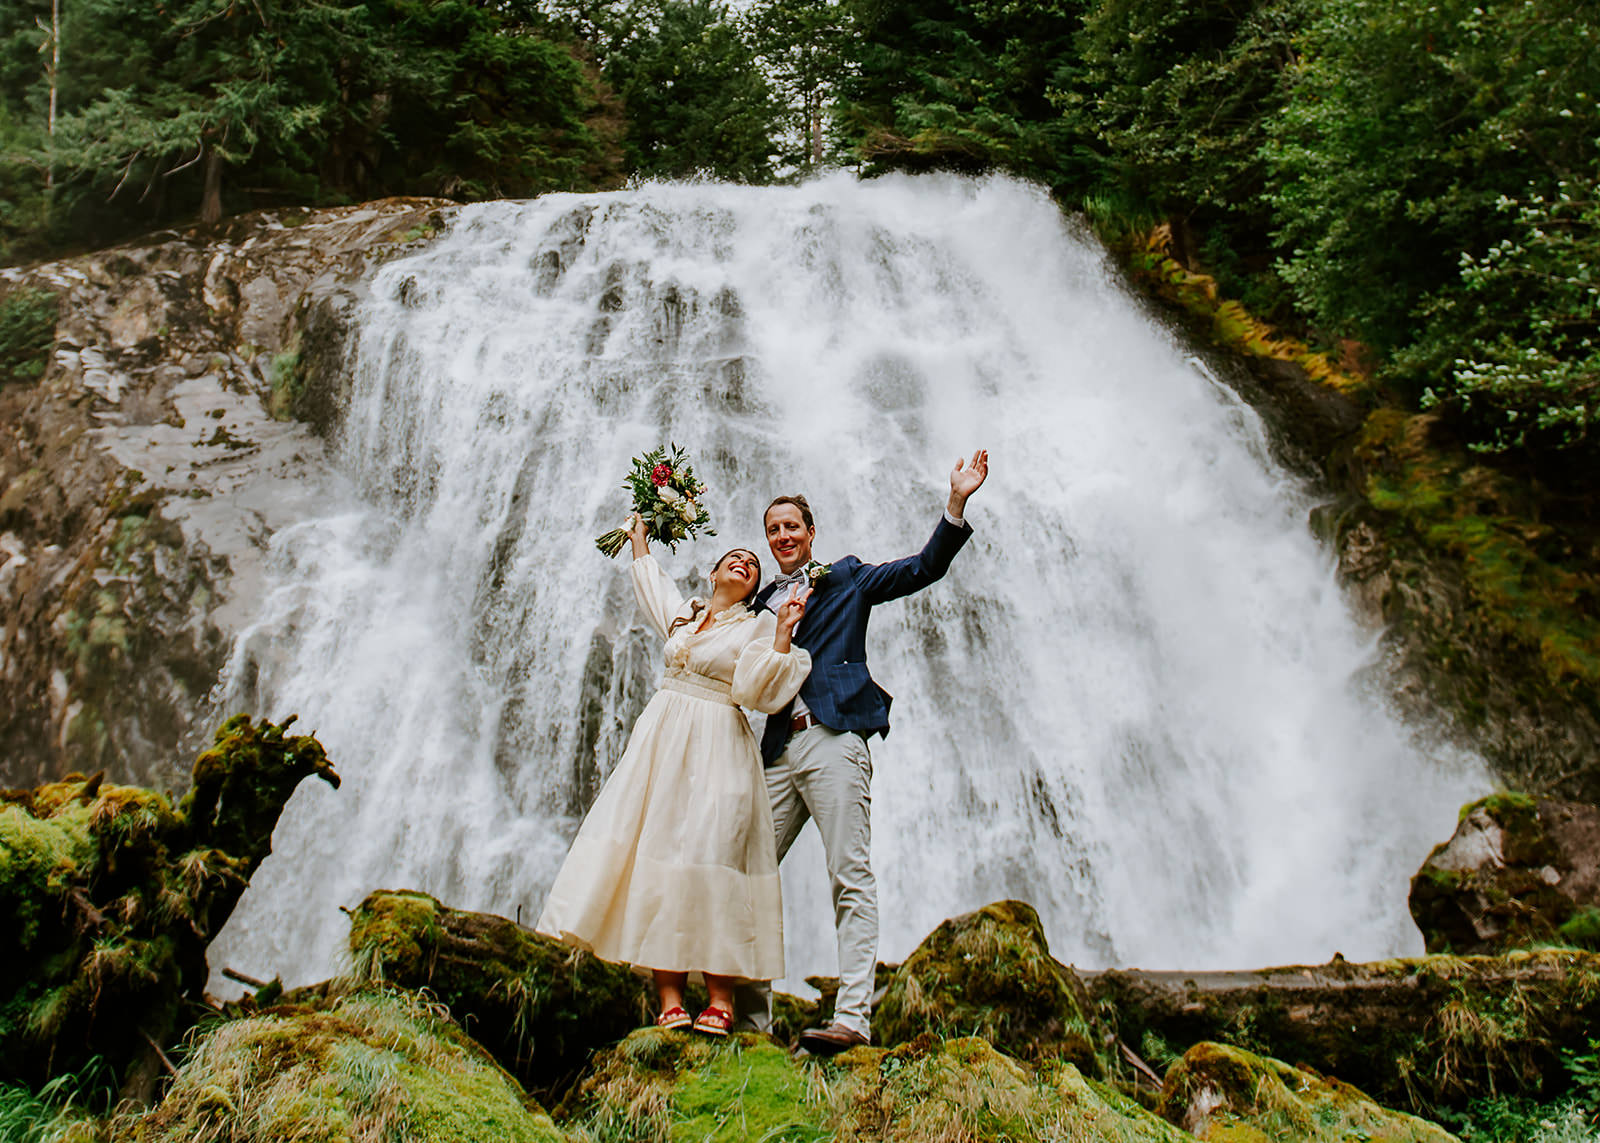 Couple celebrating in front of the waterfall during their British Columbia Adventure Elopement at Chatterbox falls.